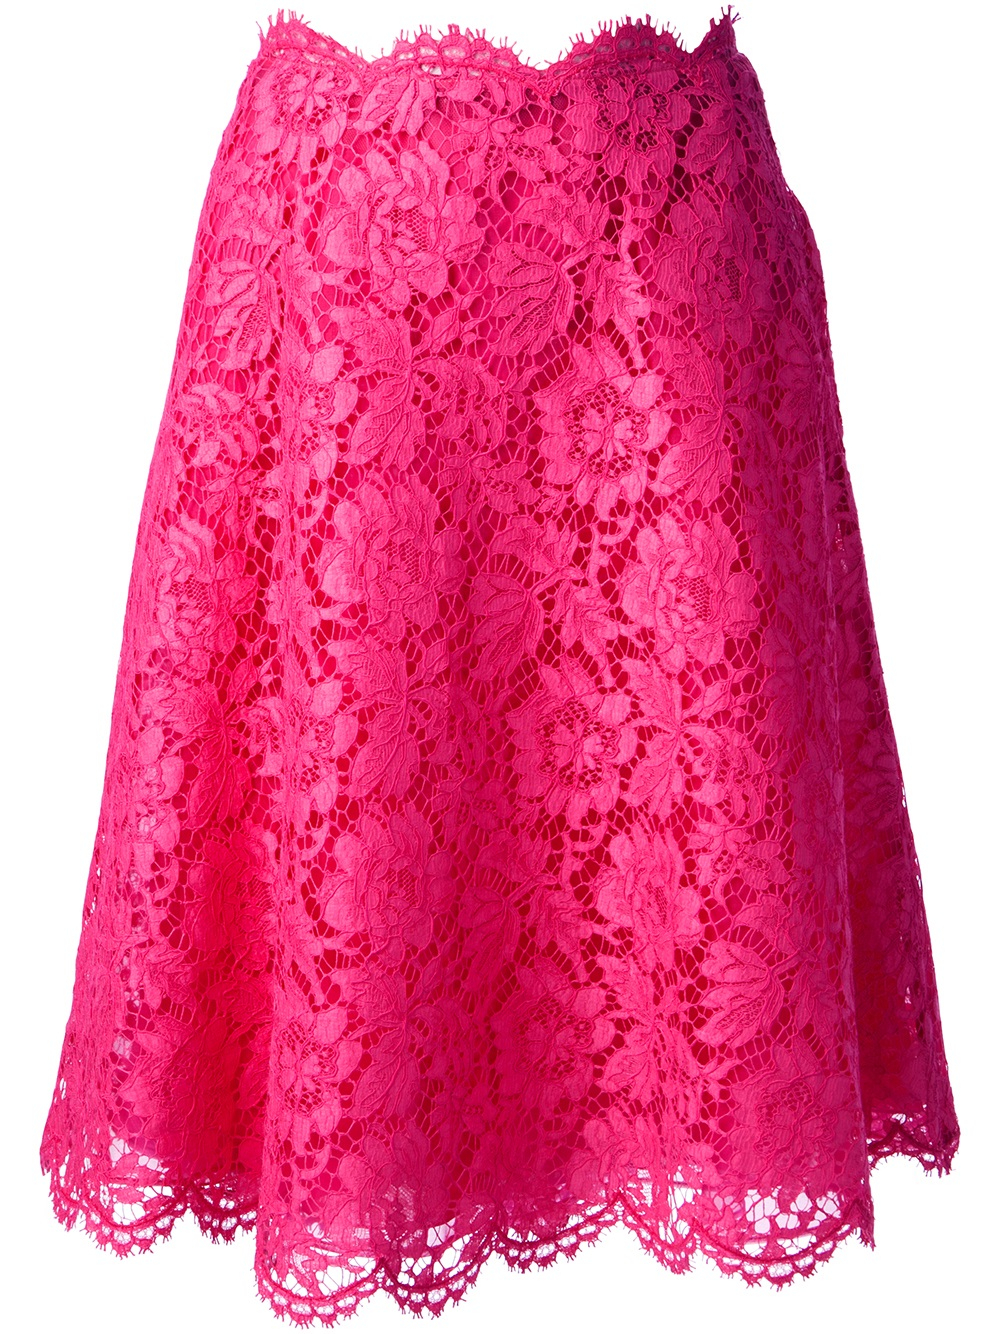 Lyst - Valentino Floral Lace Aline Skirt in Pink